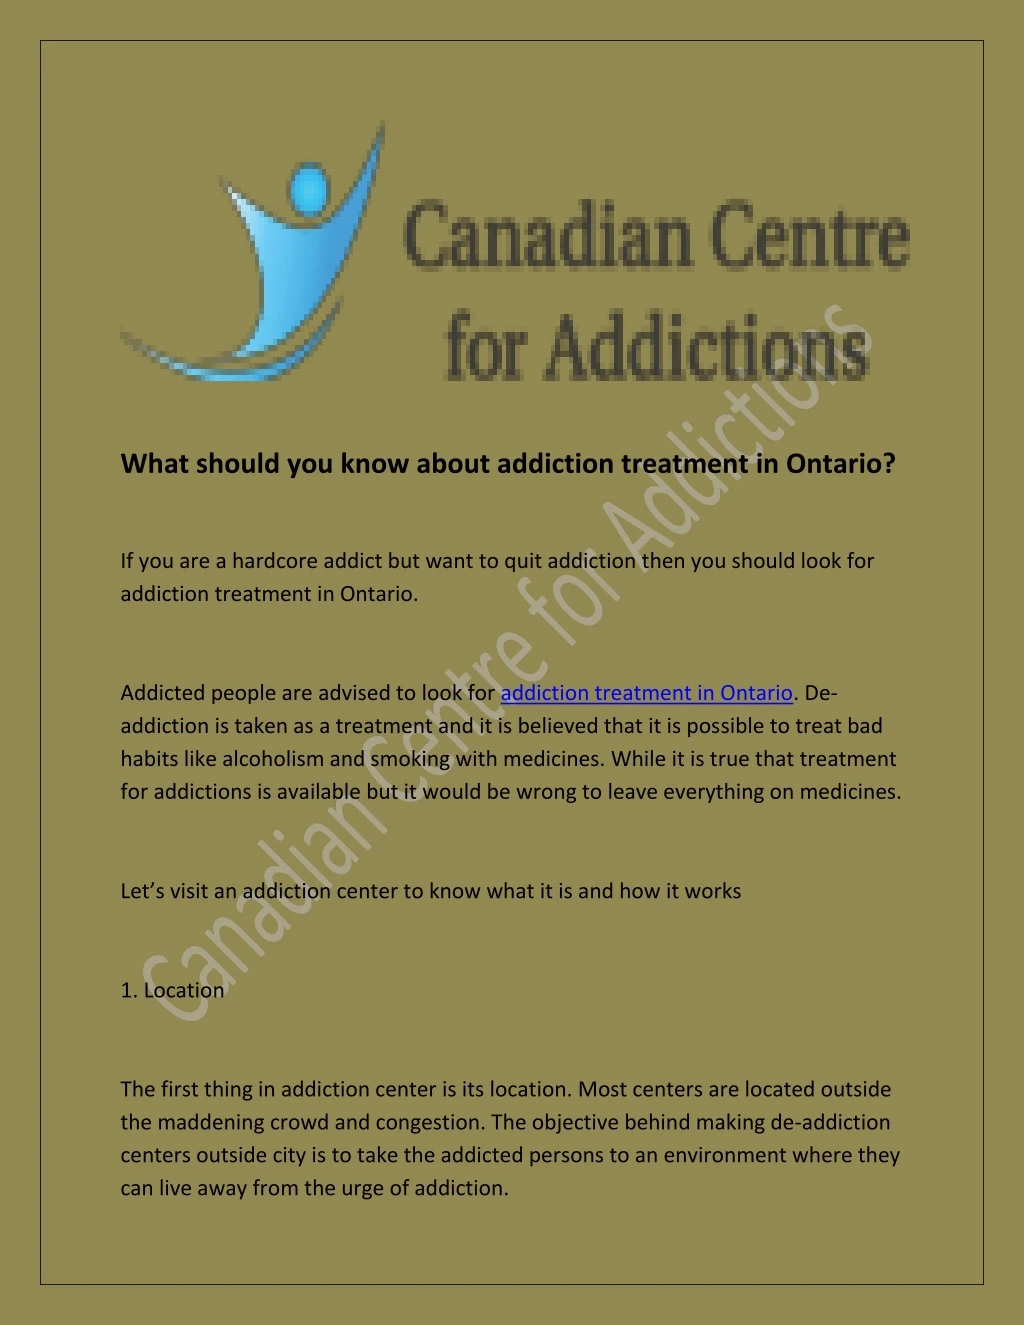 what should you know about addiction treatment